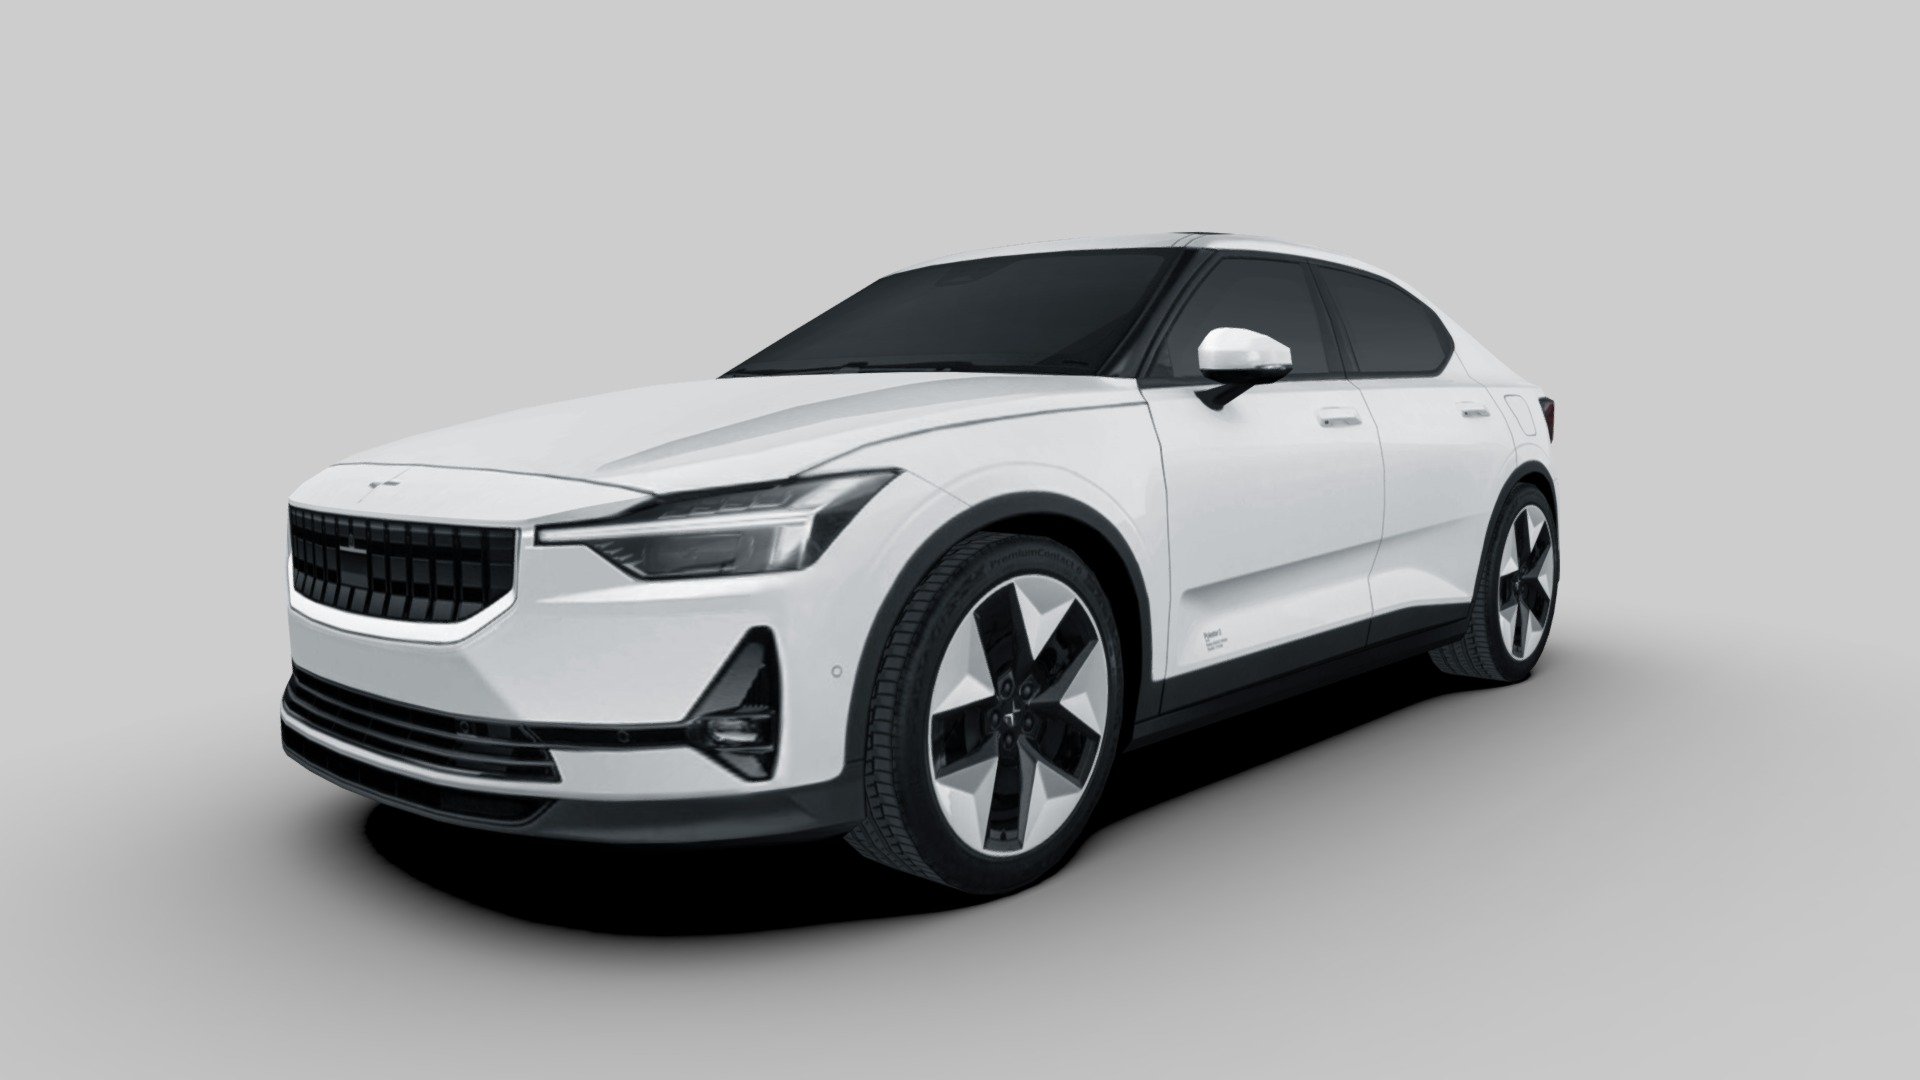 3d model of the 2023 Polestar 2, a all-electric compact executive car.

The model is very low-poly, full-scale, real photos texture (single 2048 x 2048 png).

Package includes 5 file formats and texture (3ds, fbx, dae, obj and skp)

Hope you enjoy it.

José Bronze - Polestar 2 20023 - Buy Royalty Free 3D model by Jose Bronze (@pinceladas3d) 3d model